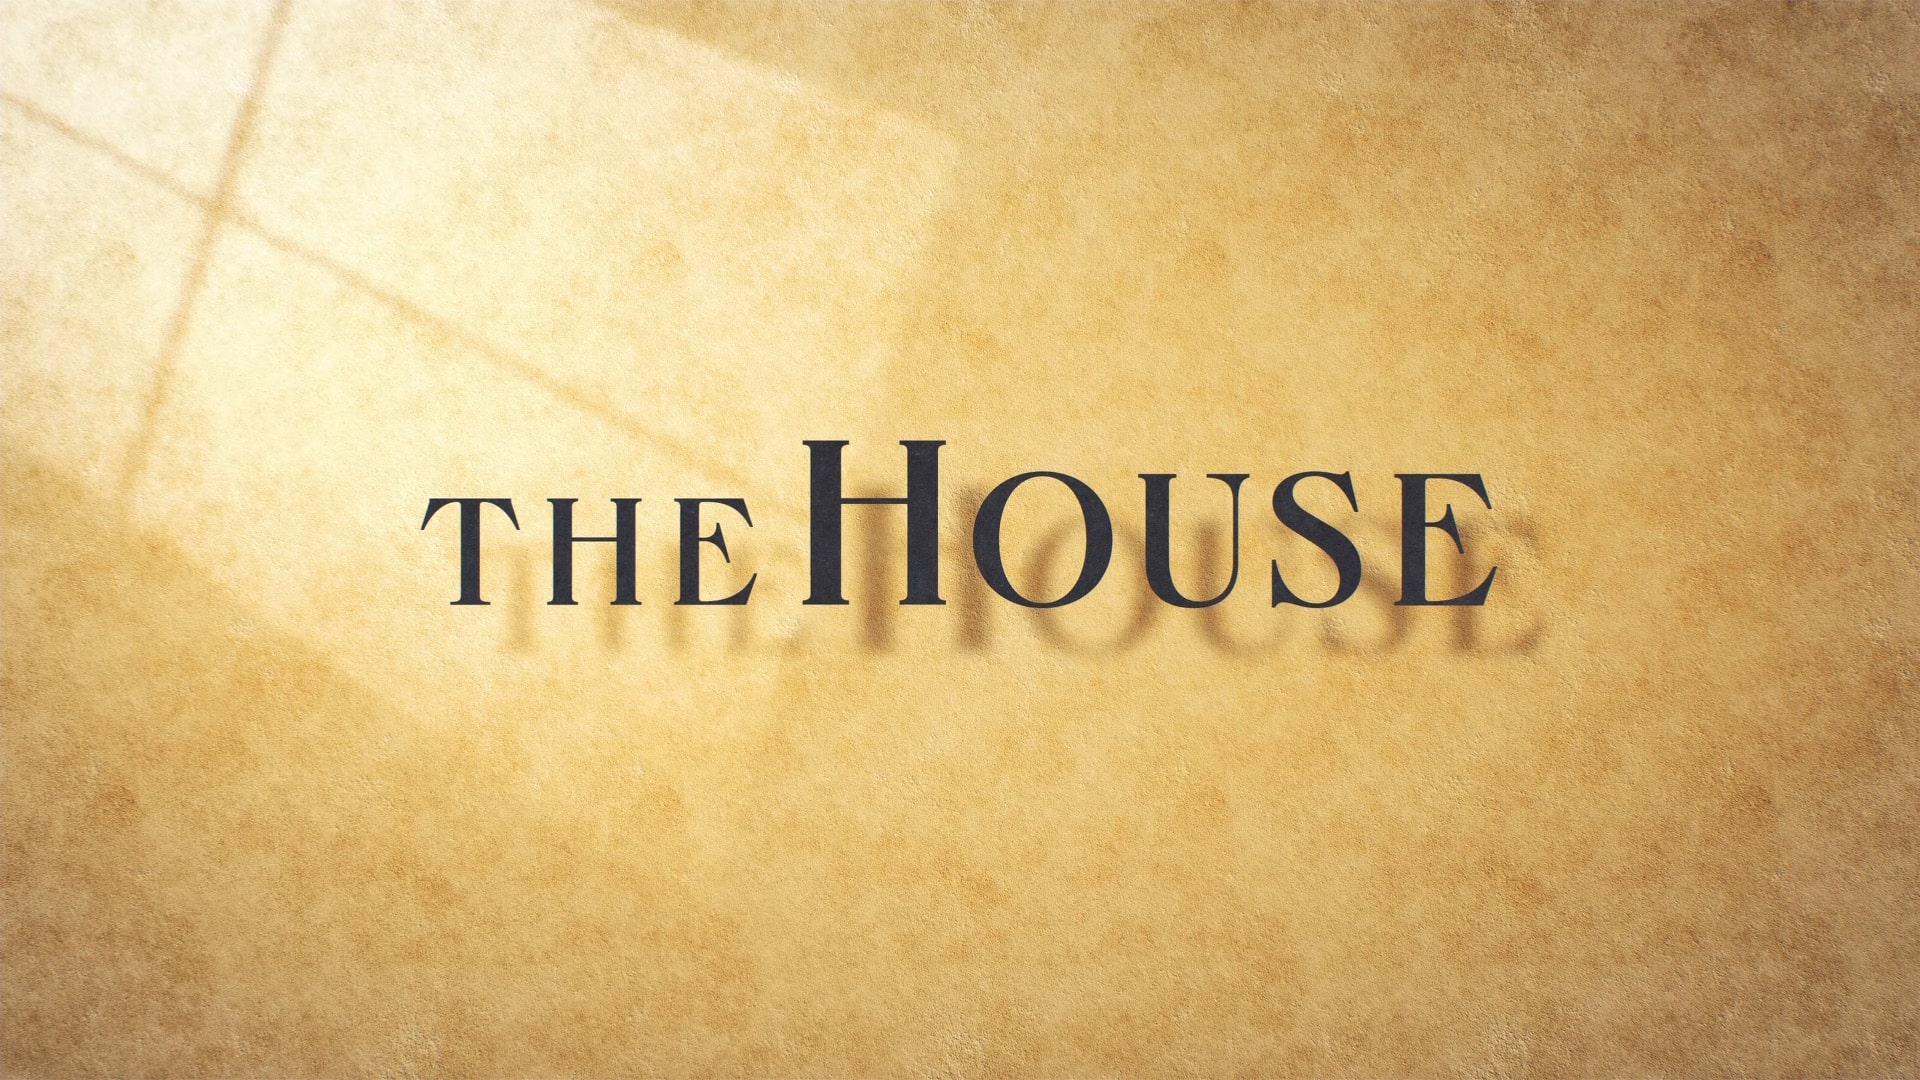 Netflix The House Netflix, Coming to Netflix in January 2022